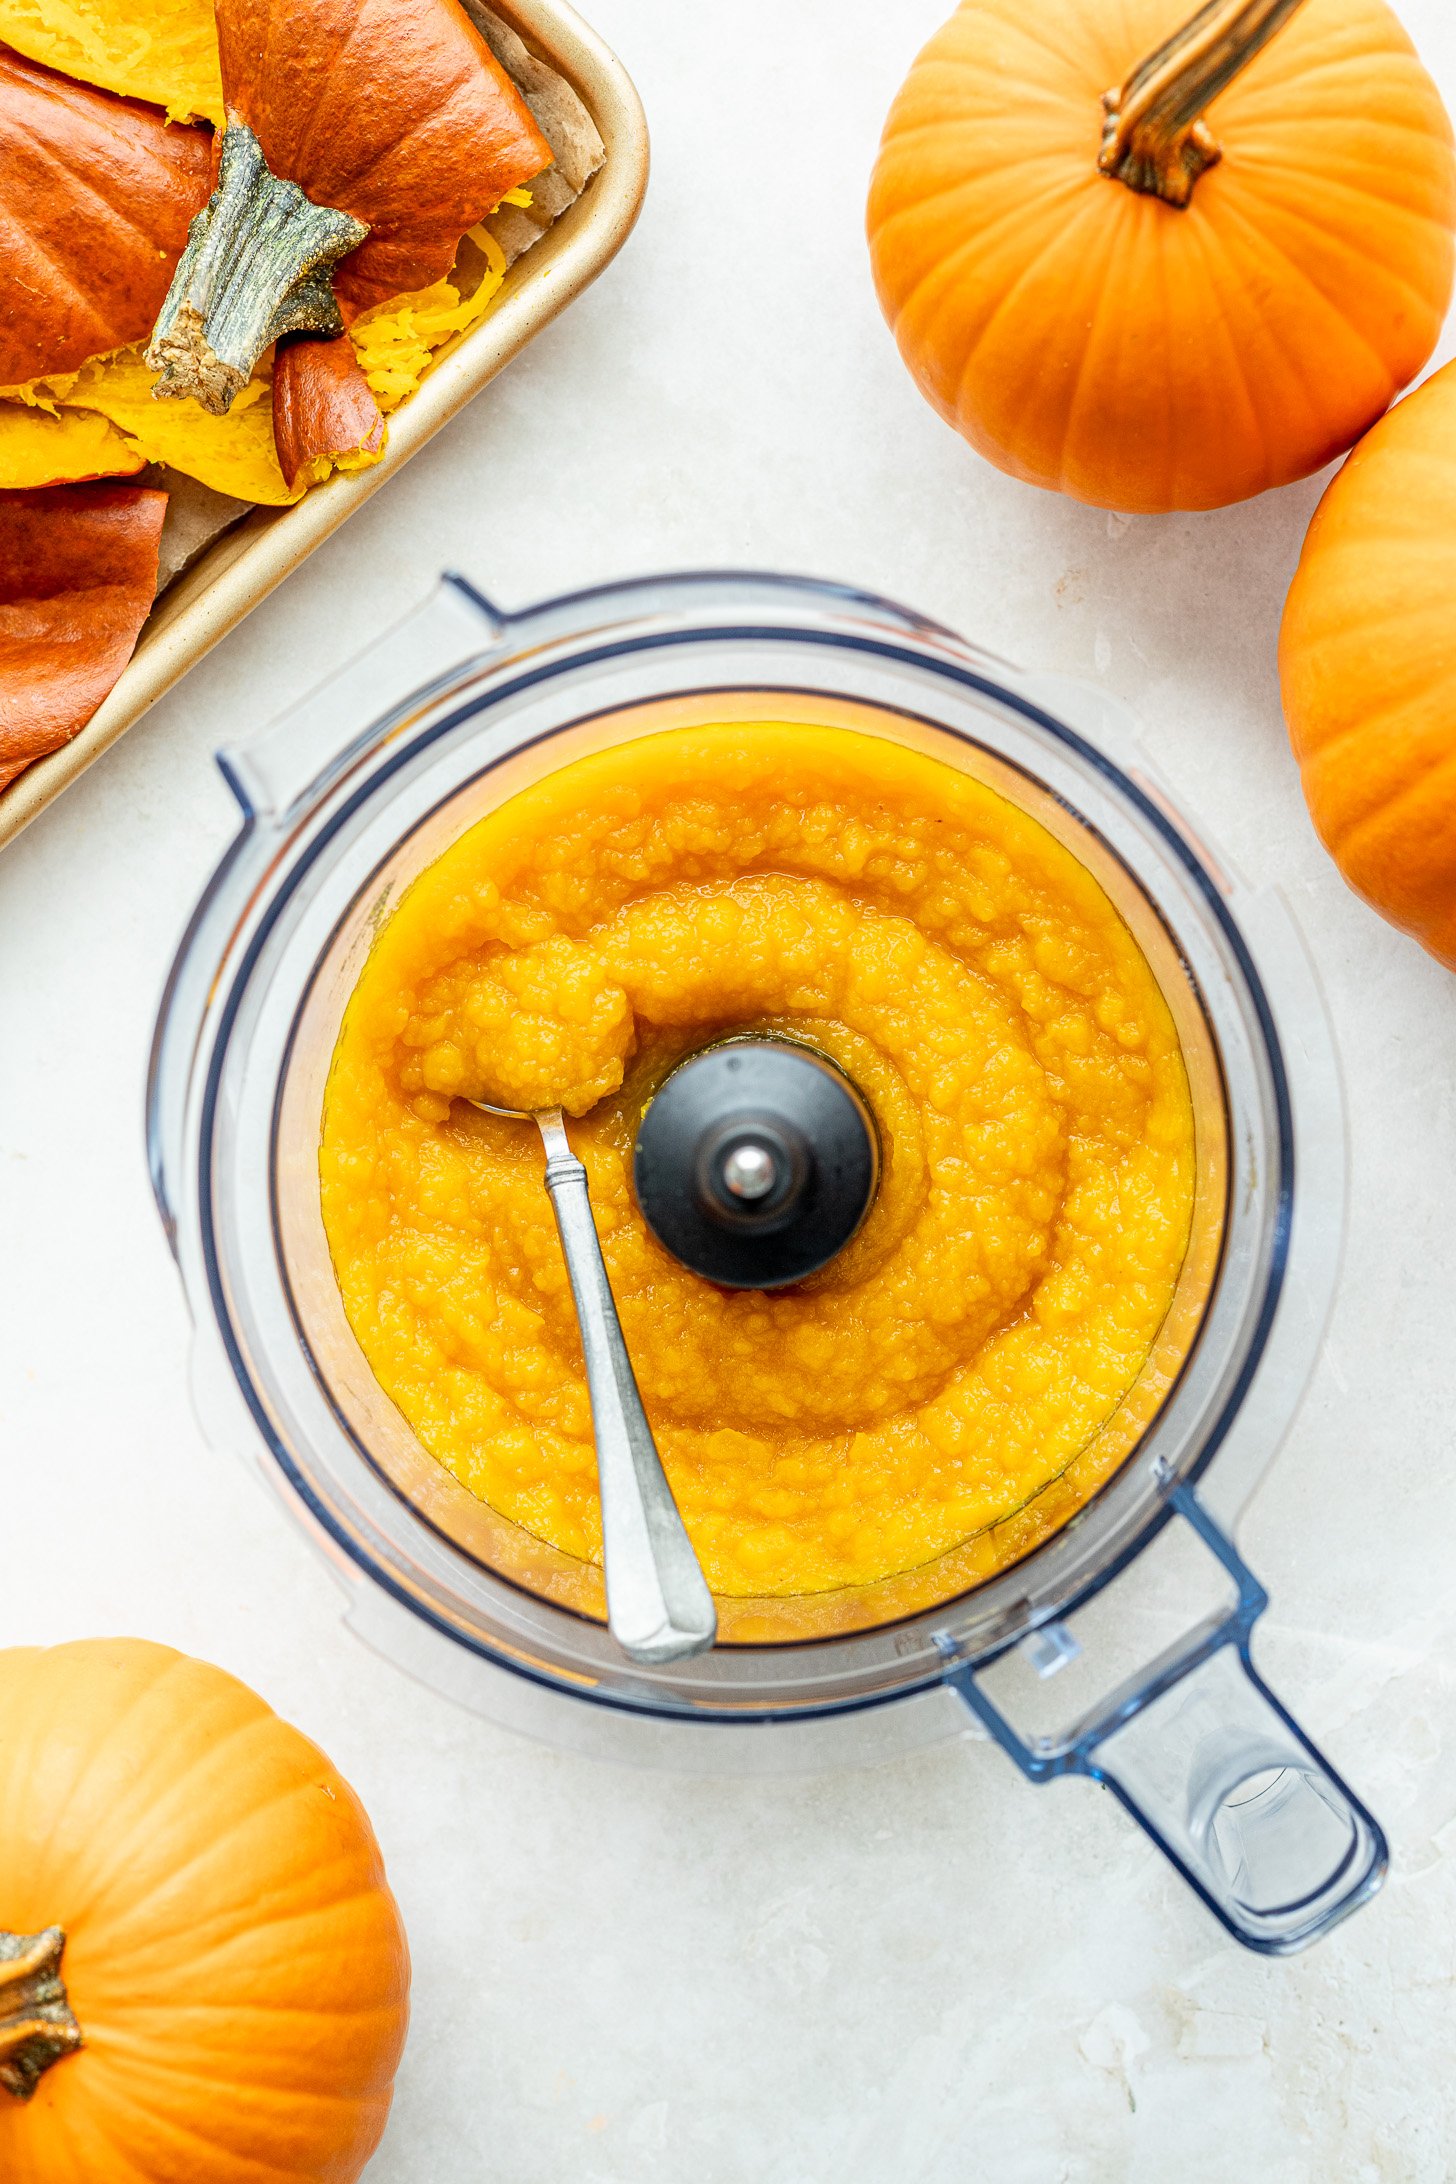 Pumpkin puree in a food processor with a spoon and pumpkins around it on a table.